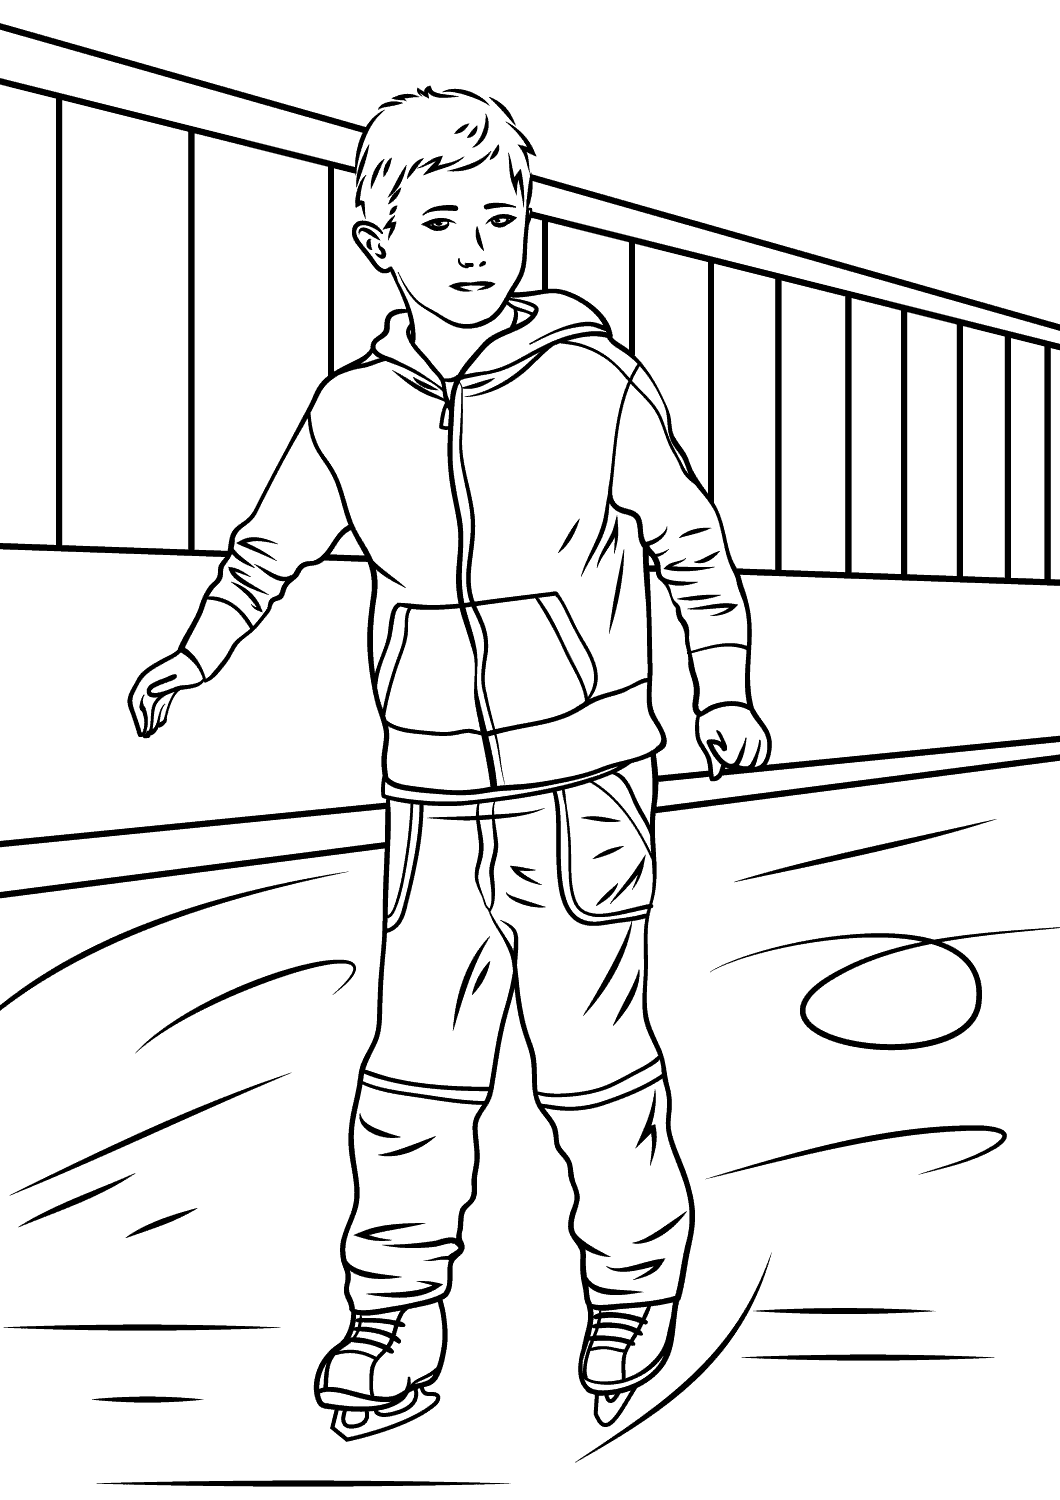 Boy Ice Skater Coloring Page